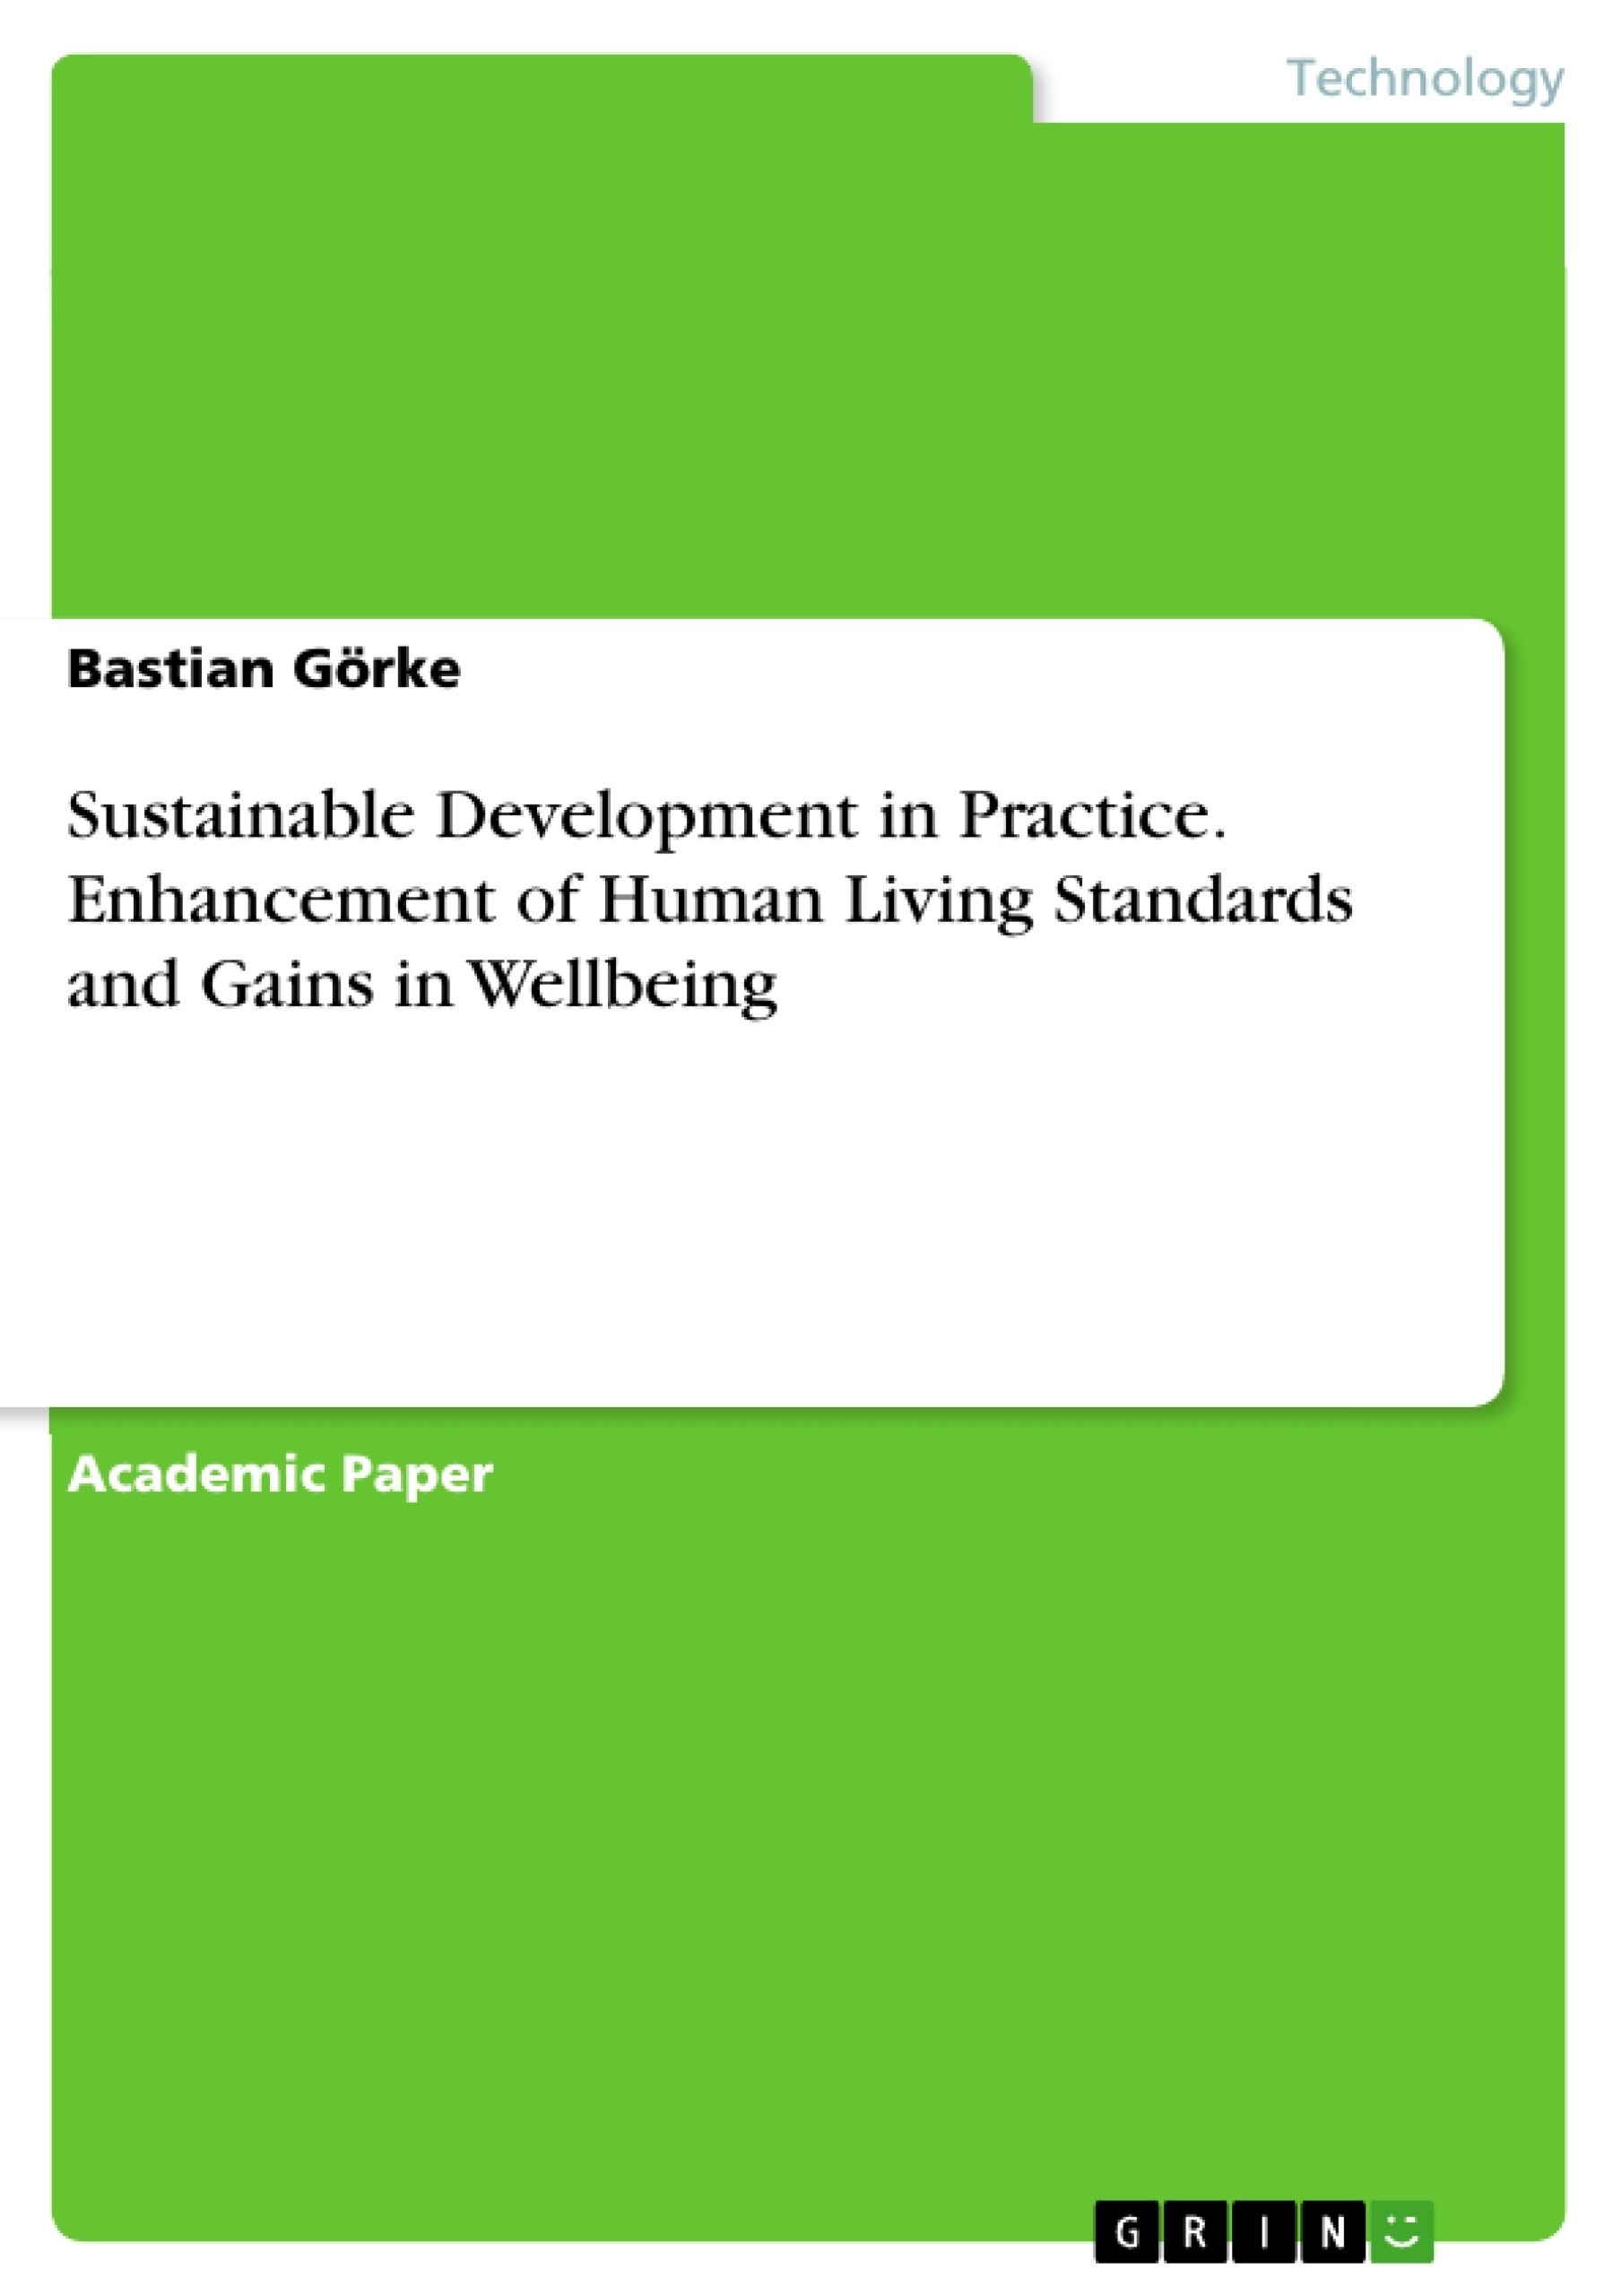 Título: Sustainable Development in Practice. Enhancement of Human Living Standards and Gains in Wellbeing